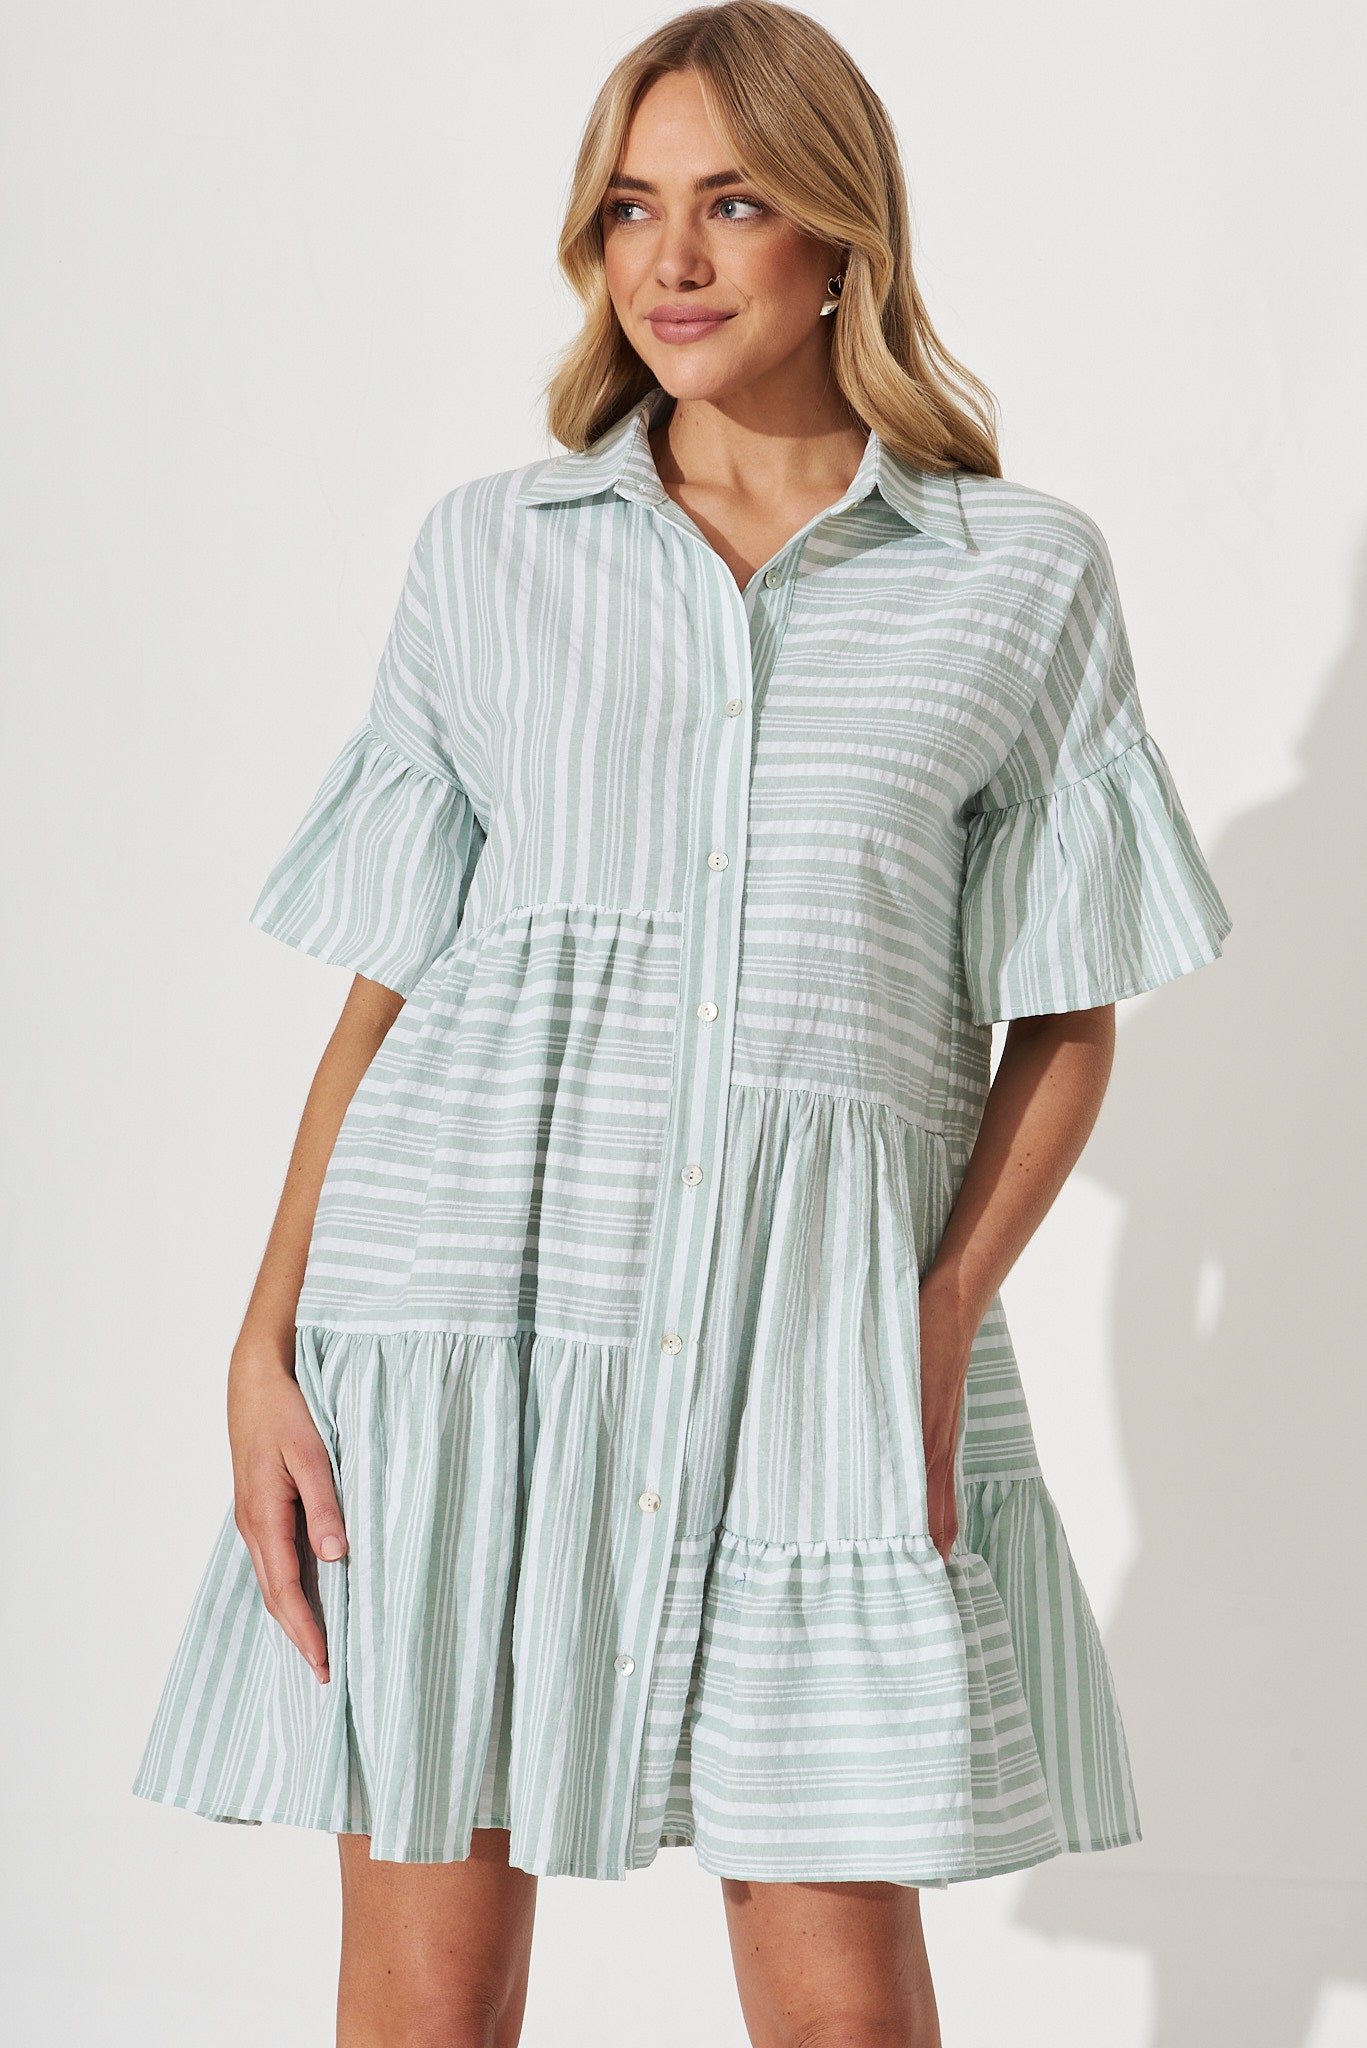 Freya Shirt Dress In Green With White Stripe - front